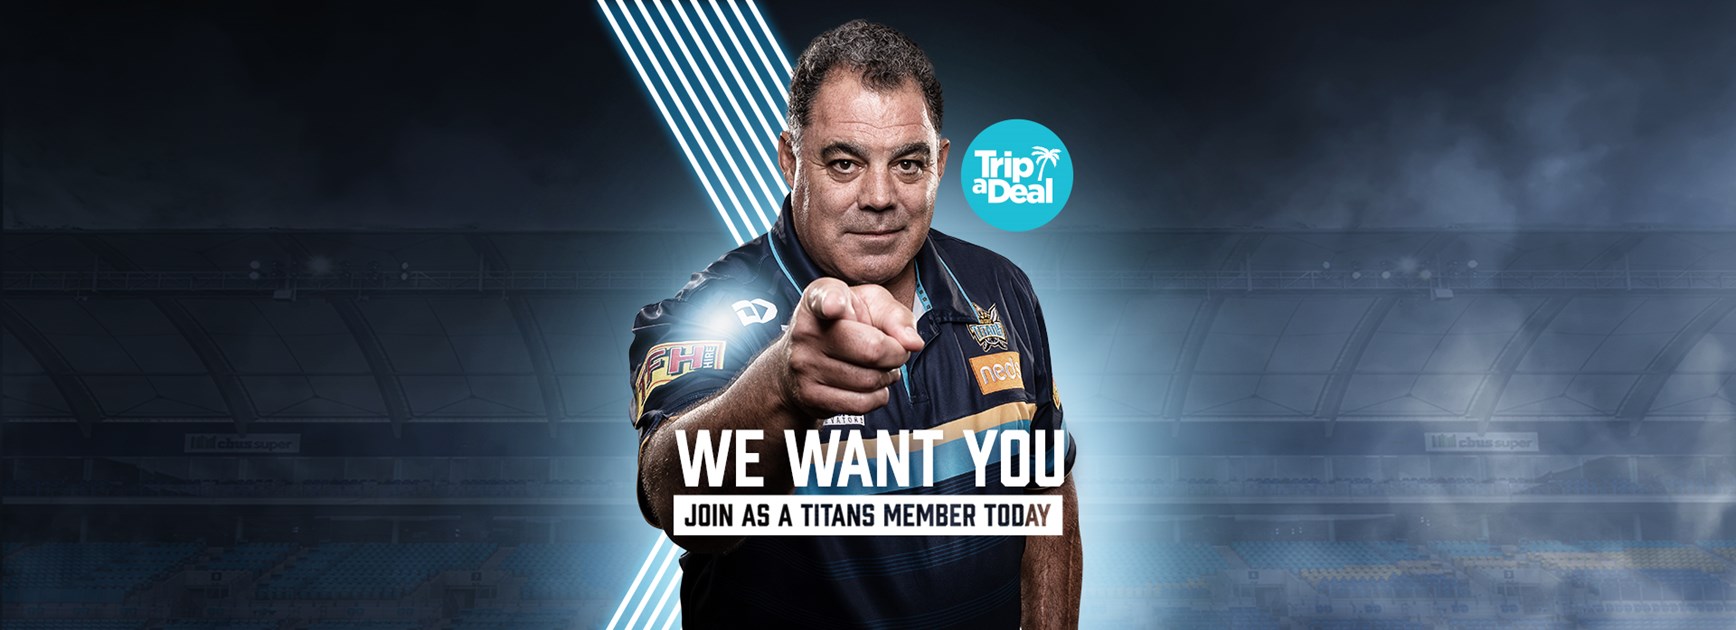 In 2019, become a Titans Member and you can win a $9000 TripADeal voucher